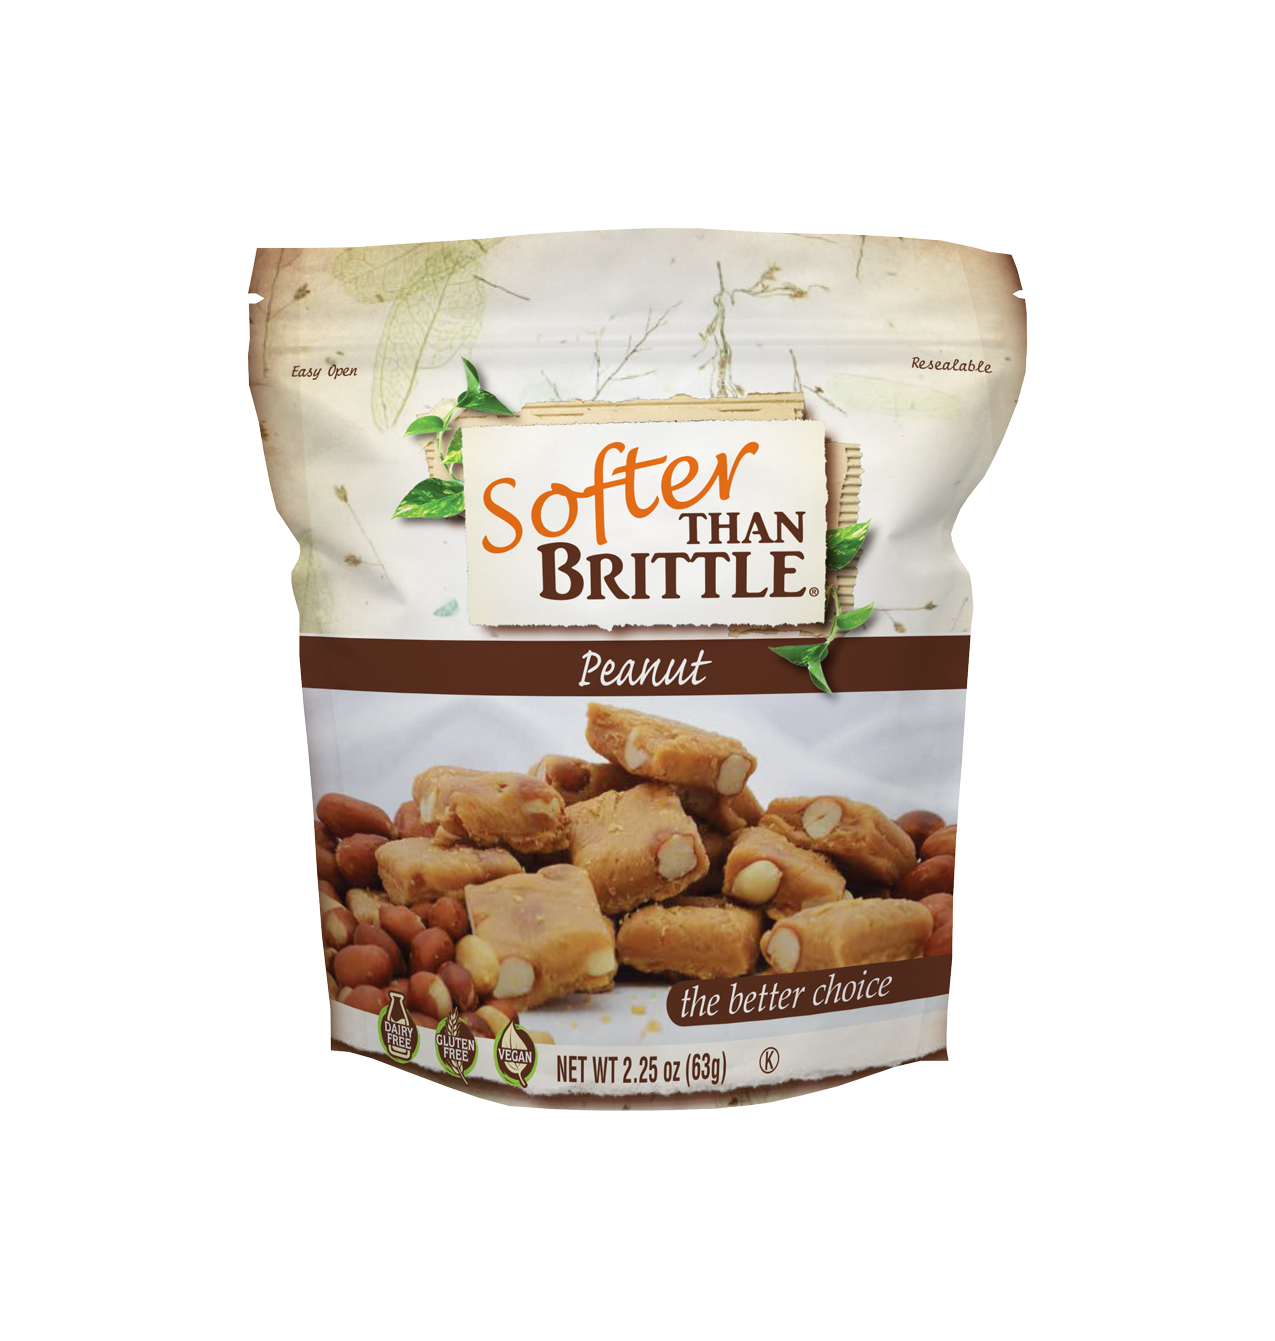 A soft flaky six ingredient gourmet nut brittle by Mount Franklin Foods